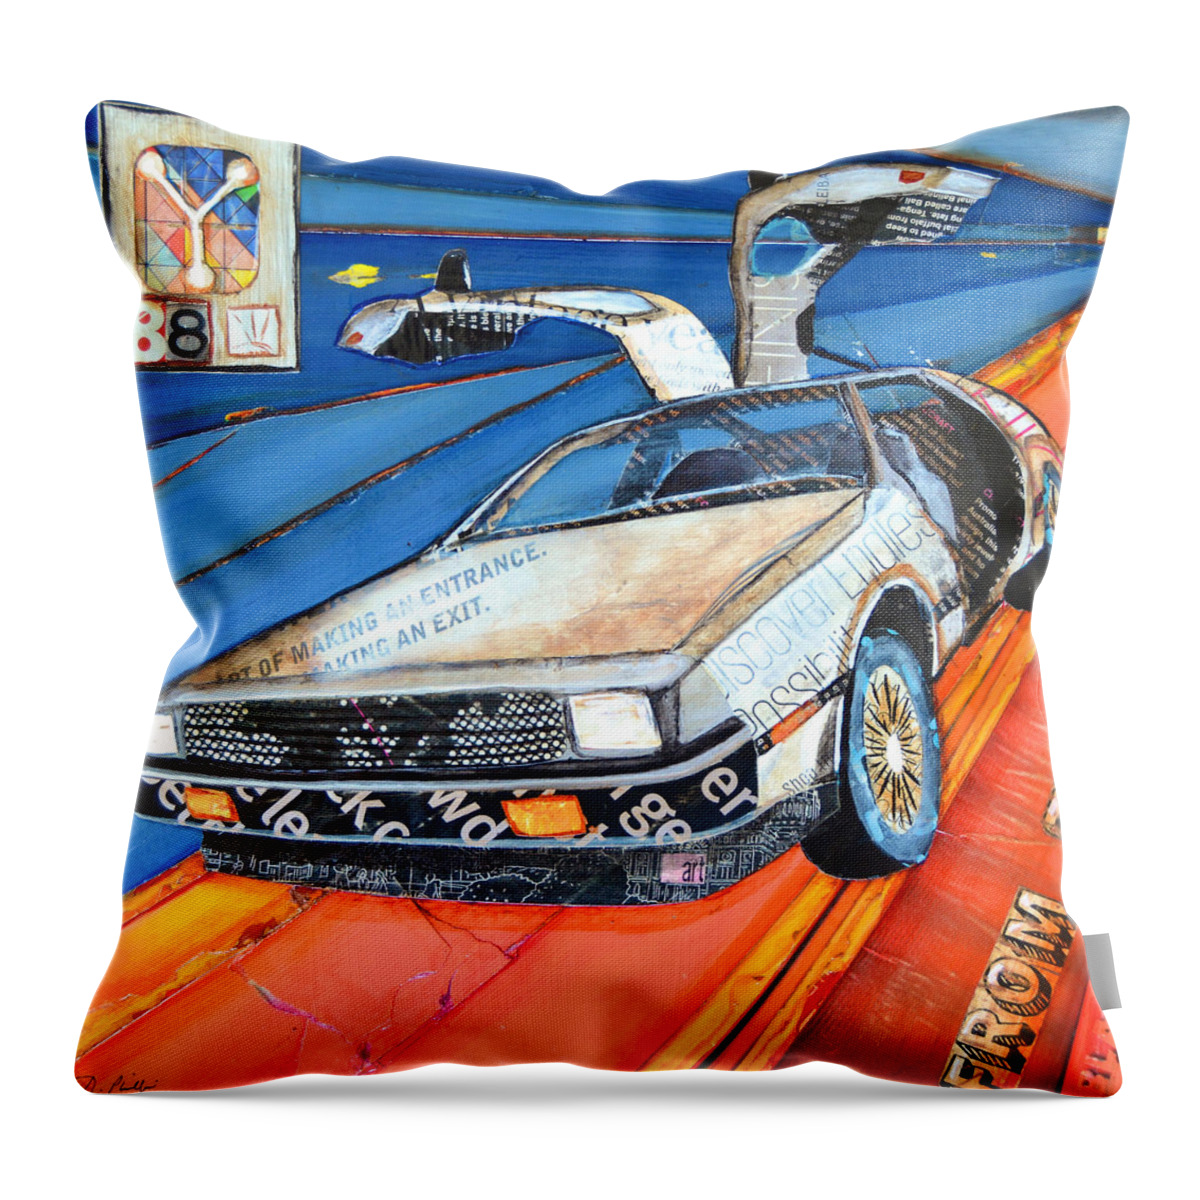 Back To The Future Throw Pillow featuring the mixed media We Don't Need Roads by Danny Phillips